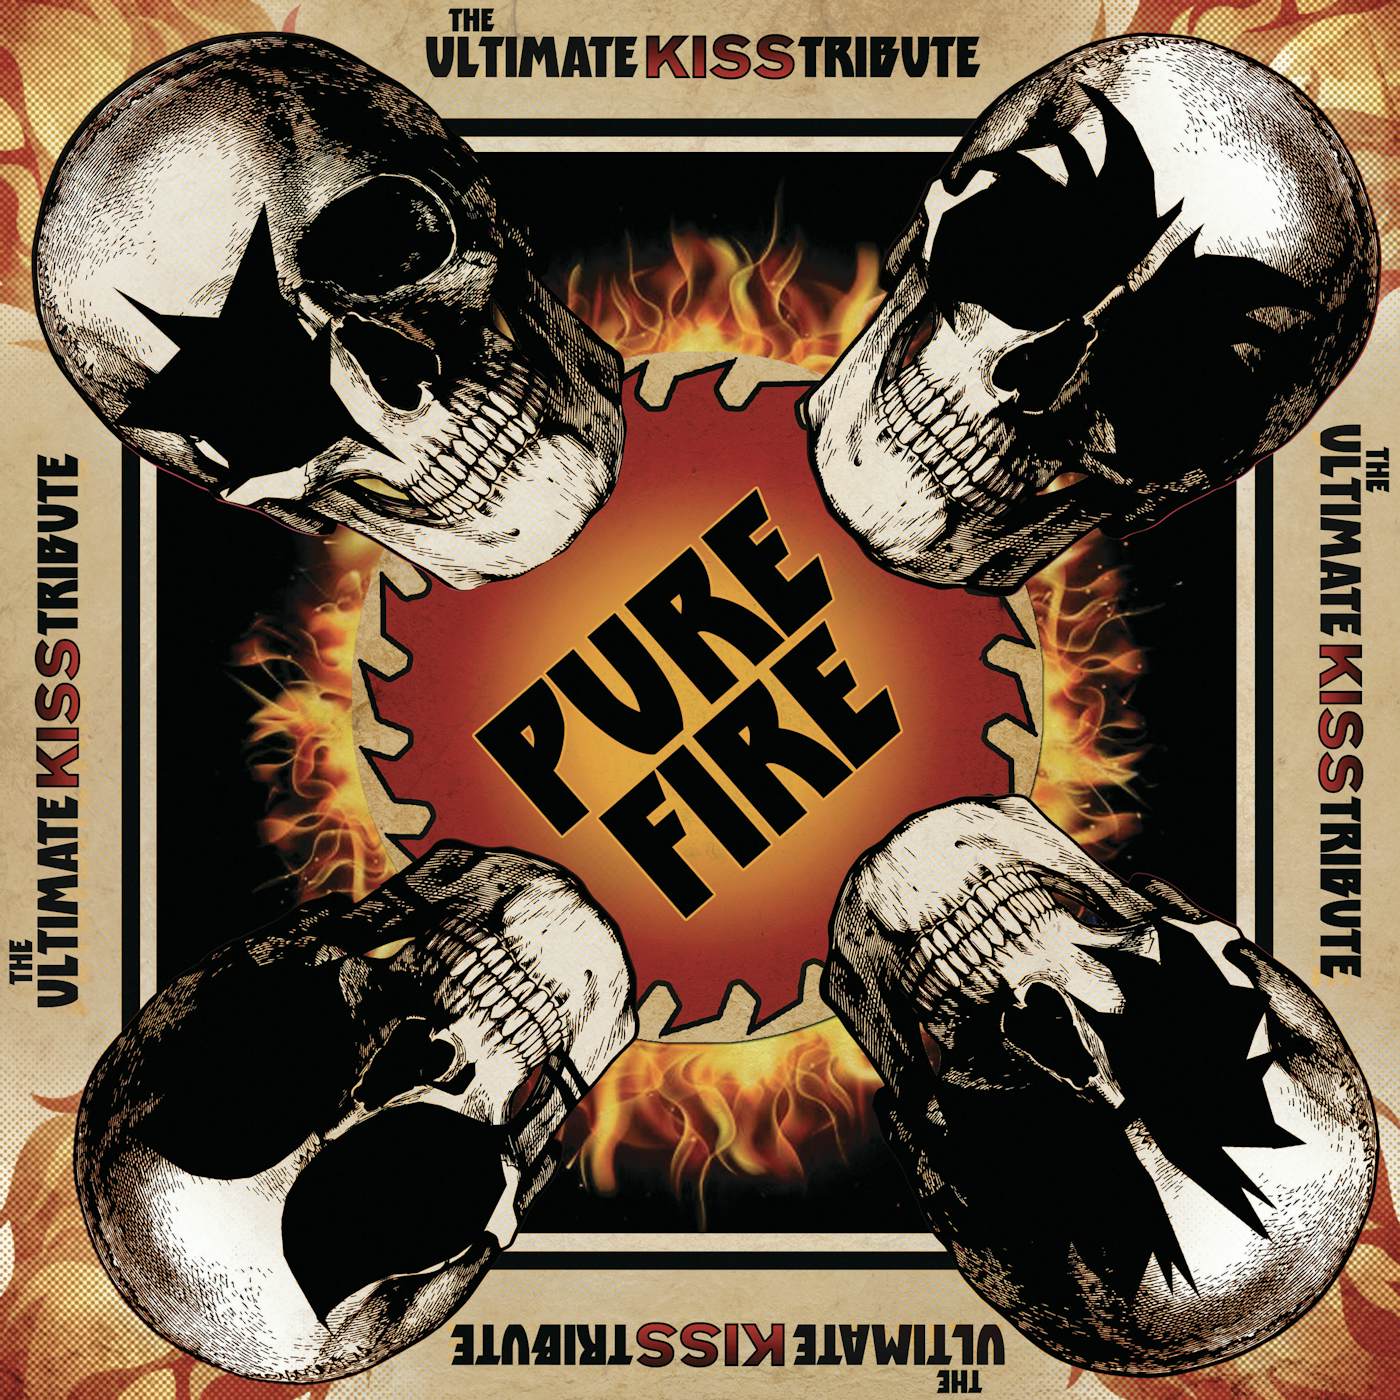 PURE FIRE - THE ULTIMATE KISS TRIBUTE / VARIOUS Vinyl Record